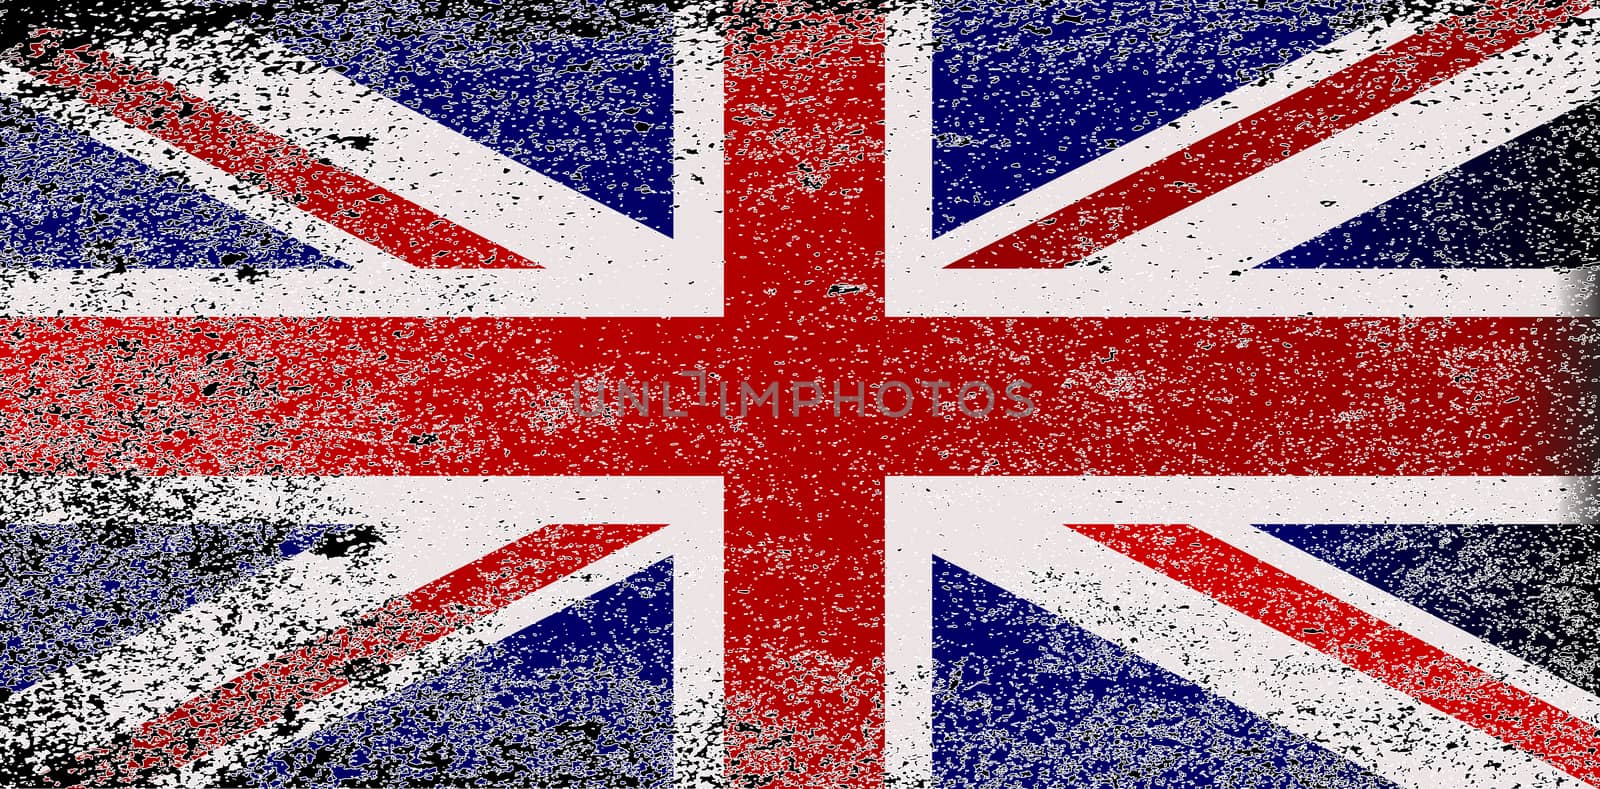 The Union Jack flag of Great Britain with heavy grunge